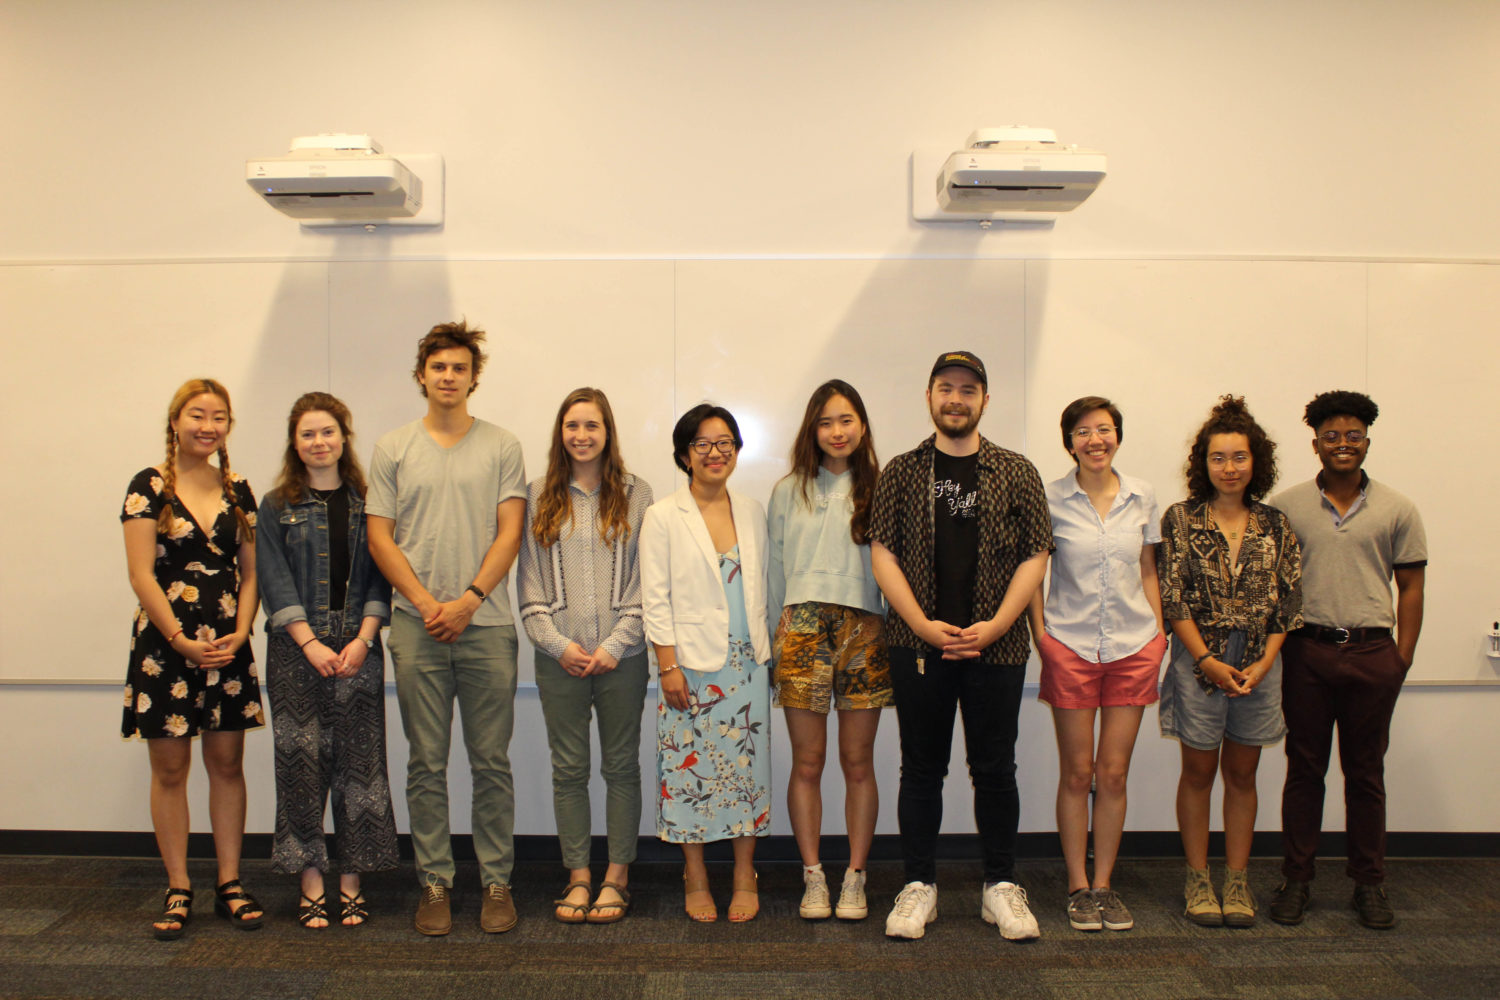 10 students lined up to celebrate their achievements as winners of the 2019 Library Undergraduate Research Awards.